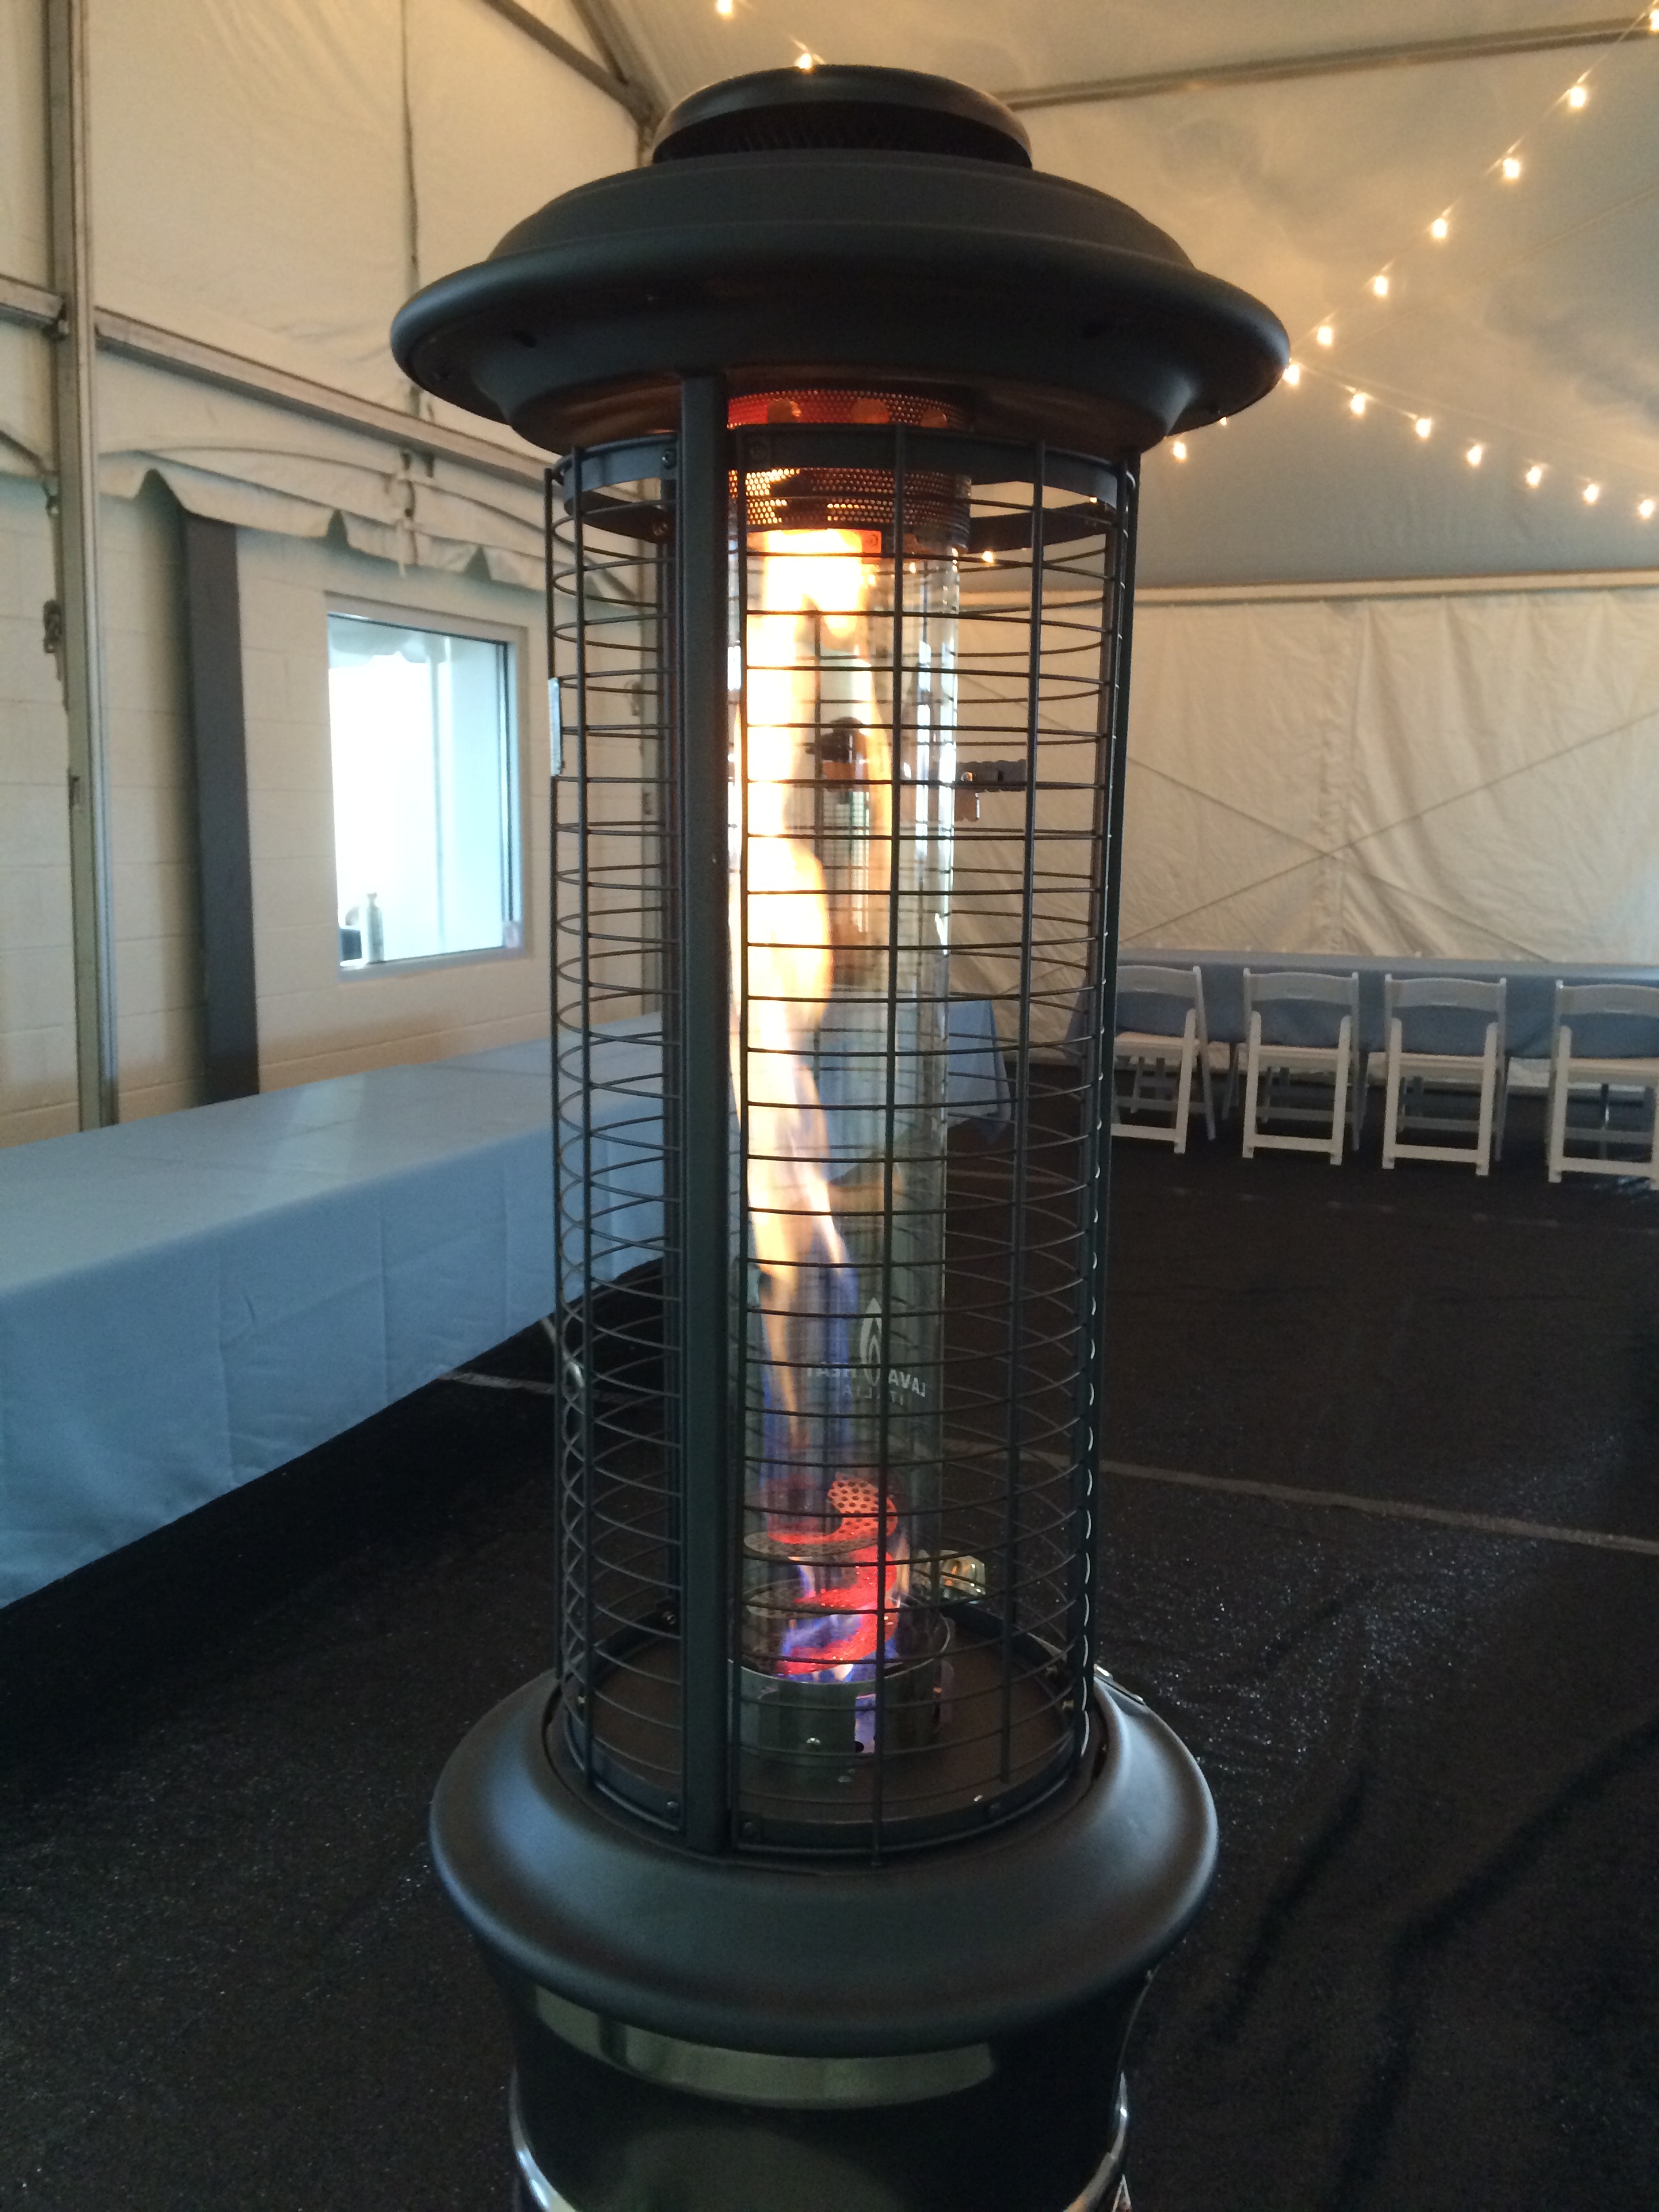 Tent heaters keep you warm even in the winter